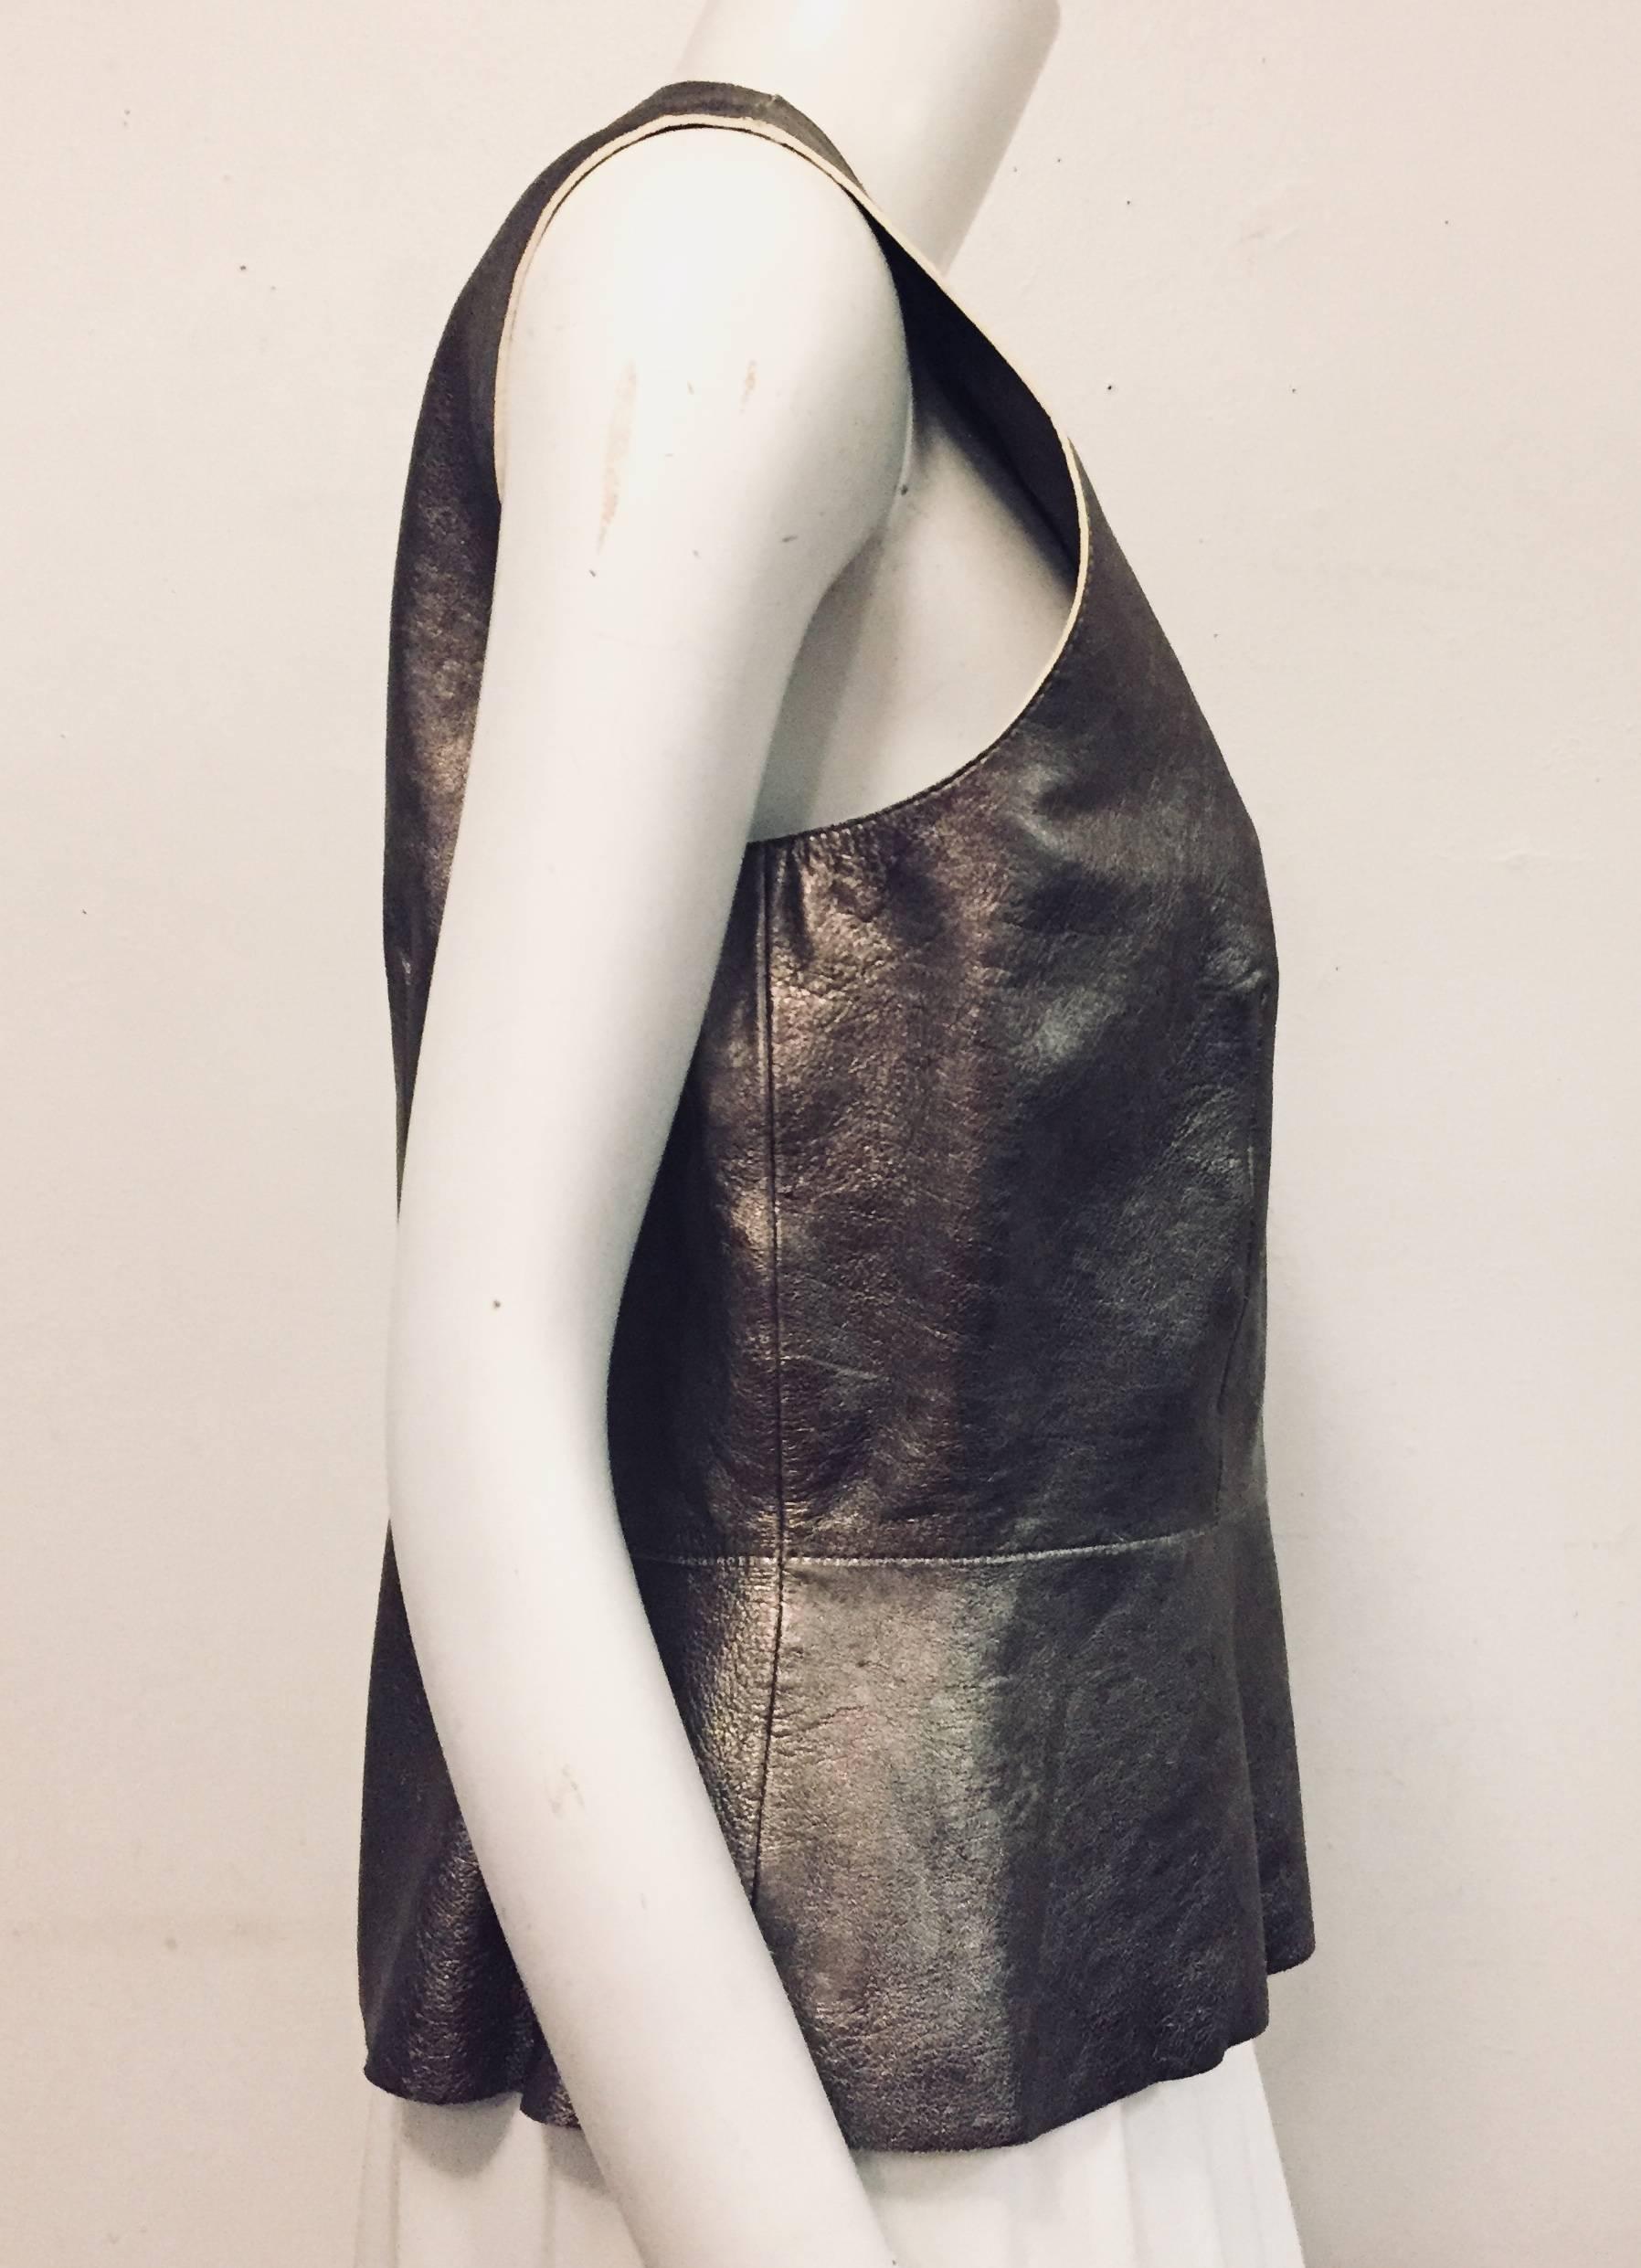 Daring Gerard Darel metallic pewter sheepskin sleeveless top highlights French design and execution.  Features ultra-luxurious leather, peek a boo opening at the back and round neckline.  Fully lined.  Fitted and flared waistline celebrates a